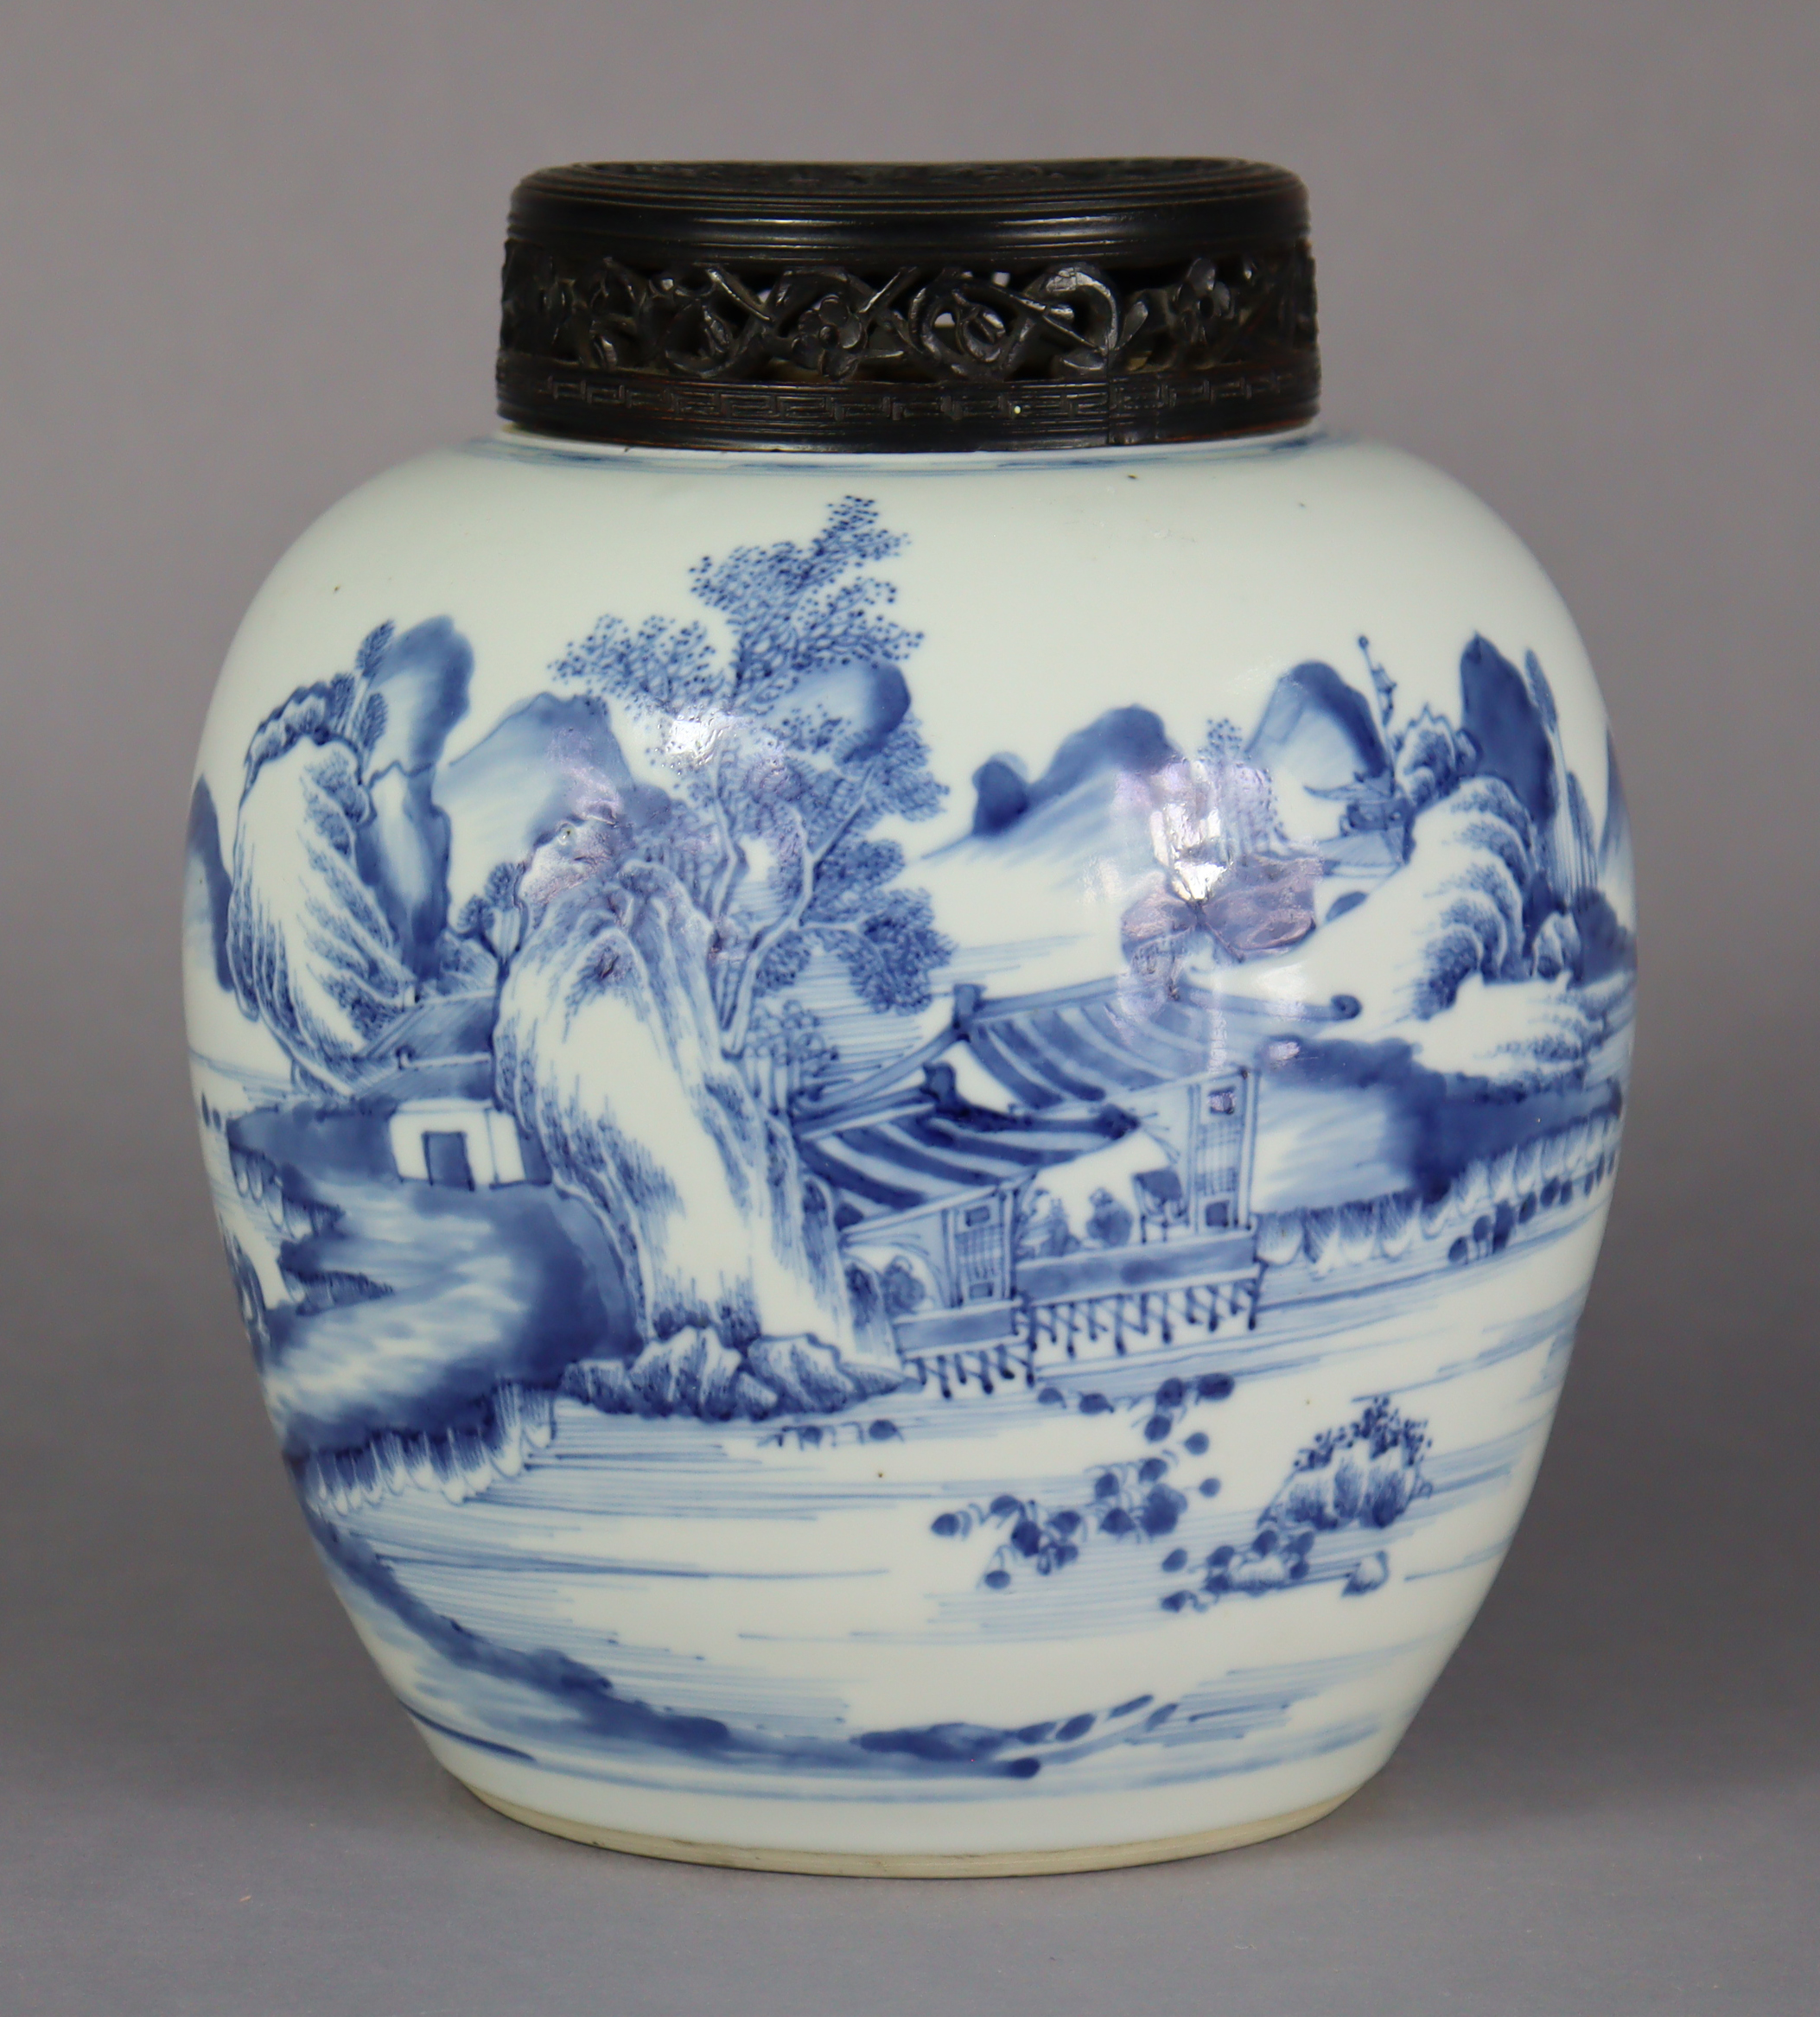 An 18th century Chinese blue & white porcelain ginger jar painted with a continuous landscape, &